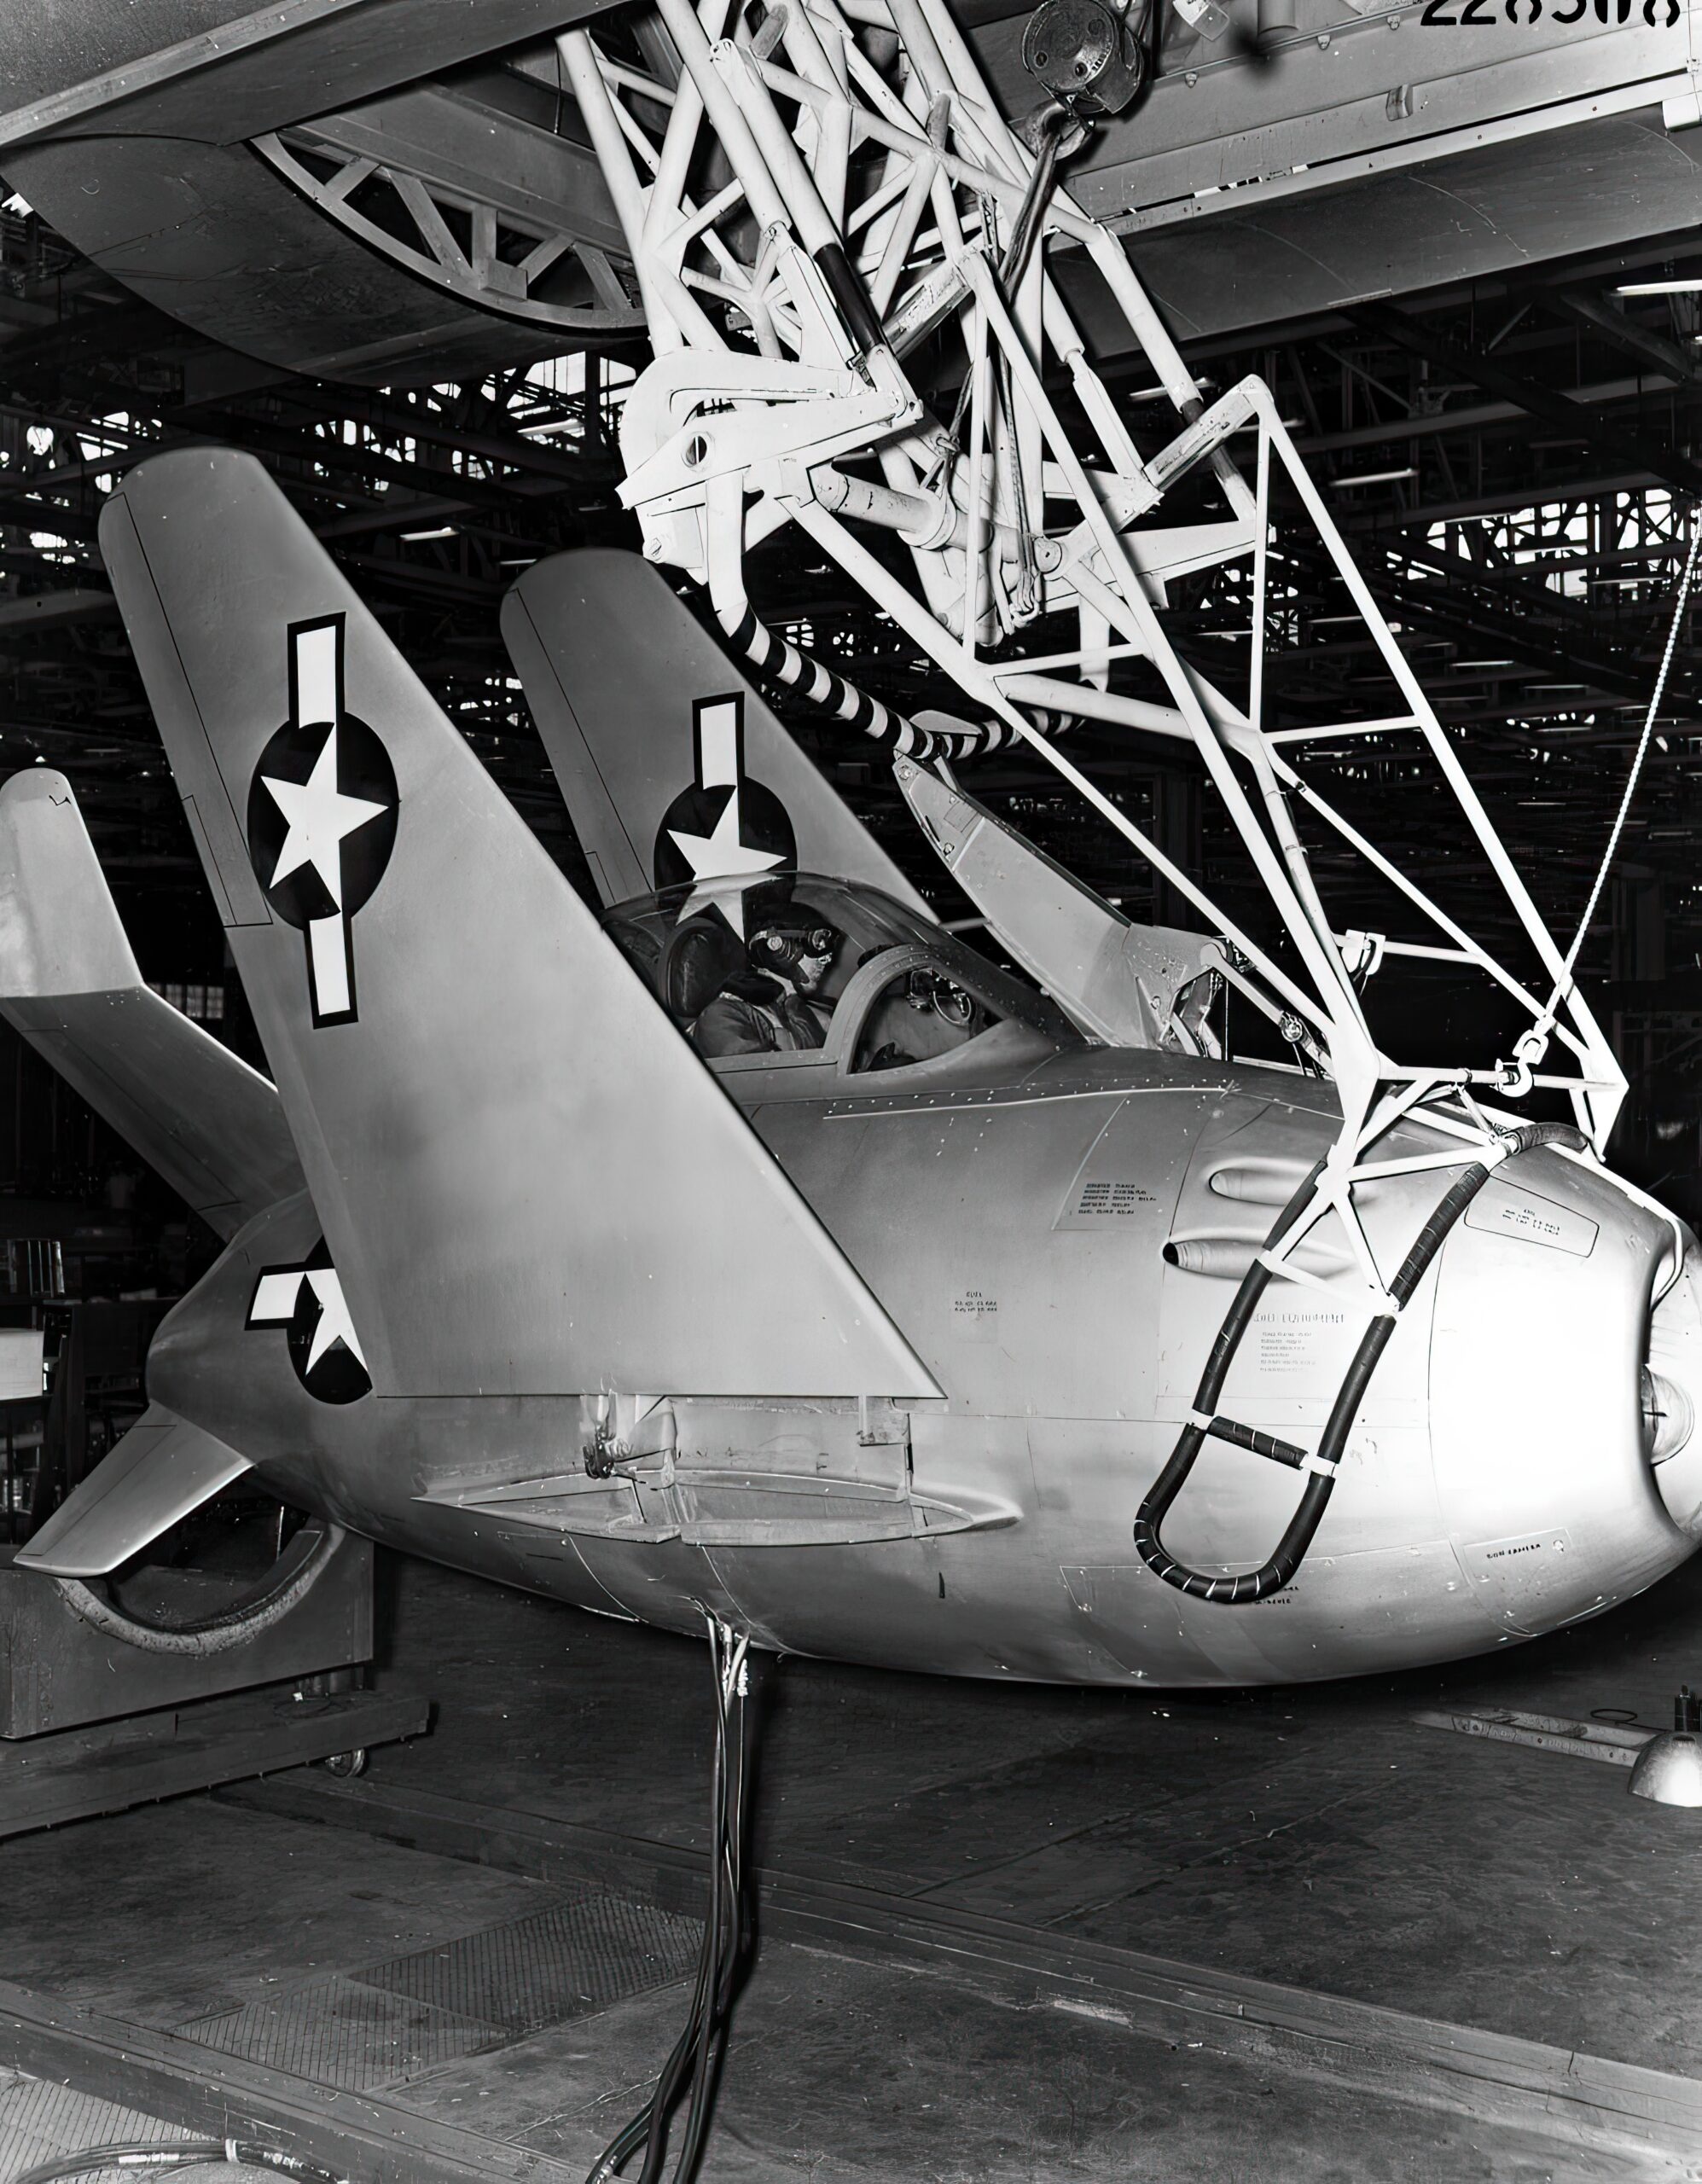 McDonnell XF-85